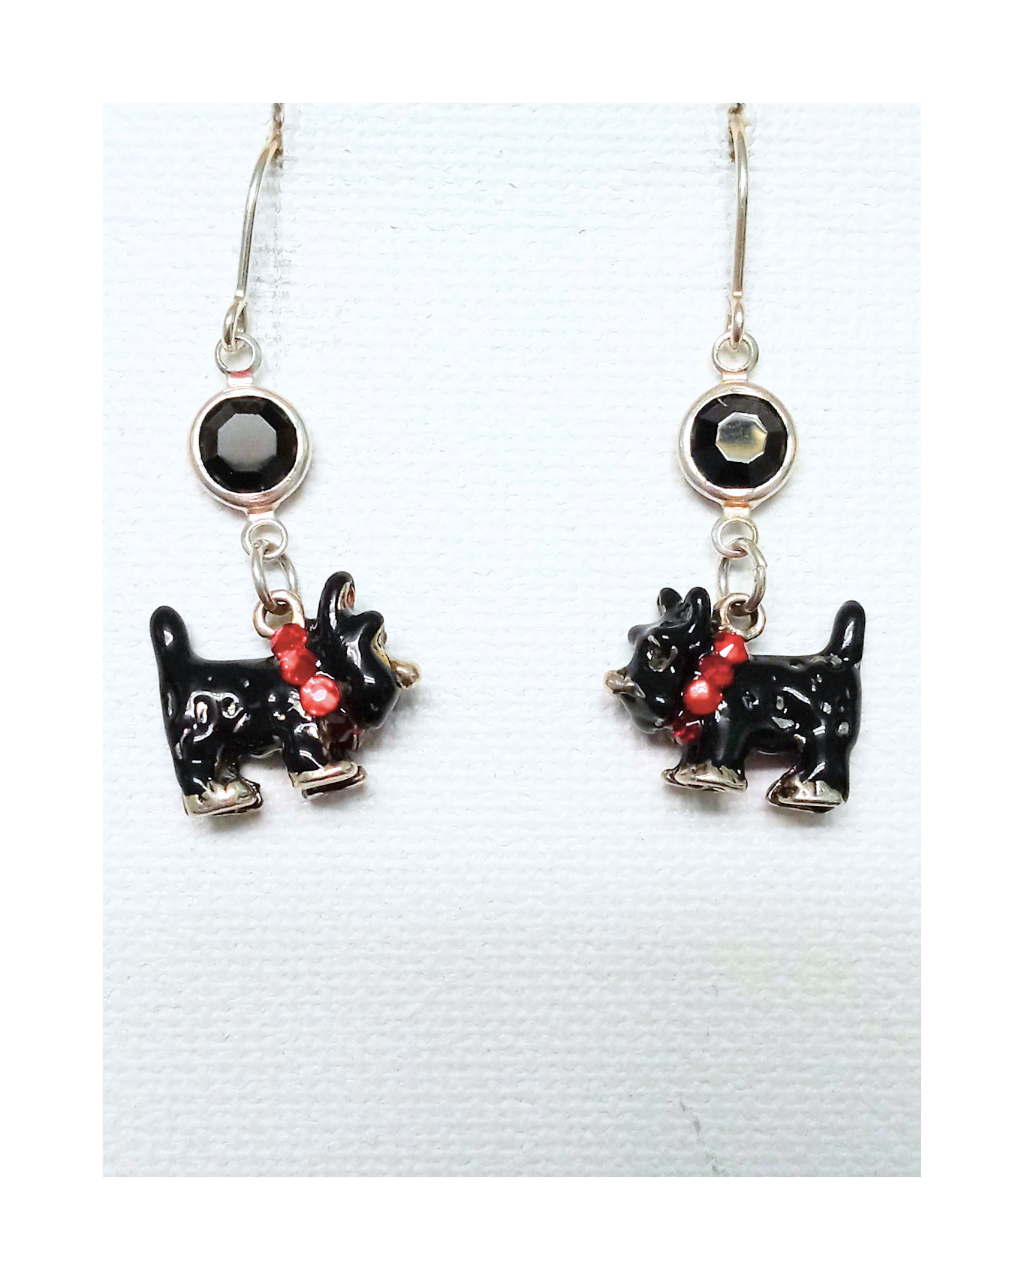 Exclusive Sterling 3-D Hand-enameled 2-sided Scottie Dog with Red Crystal Collar Black Swarovski Crystal Drop Earrings